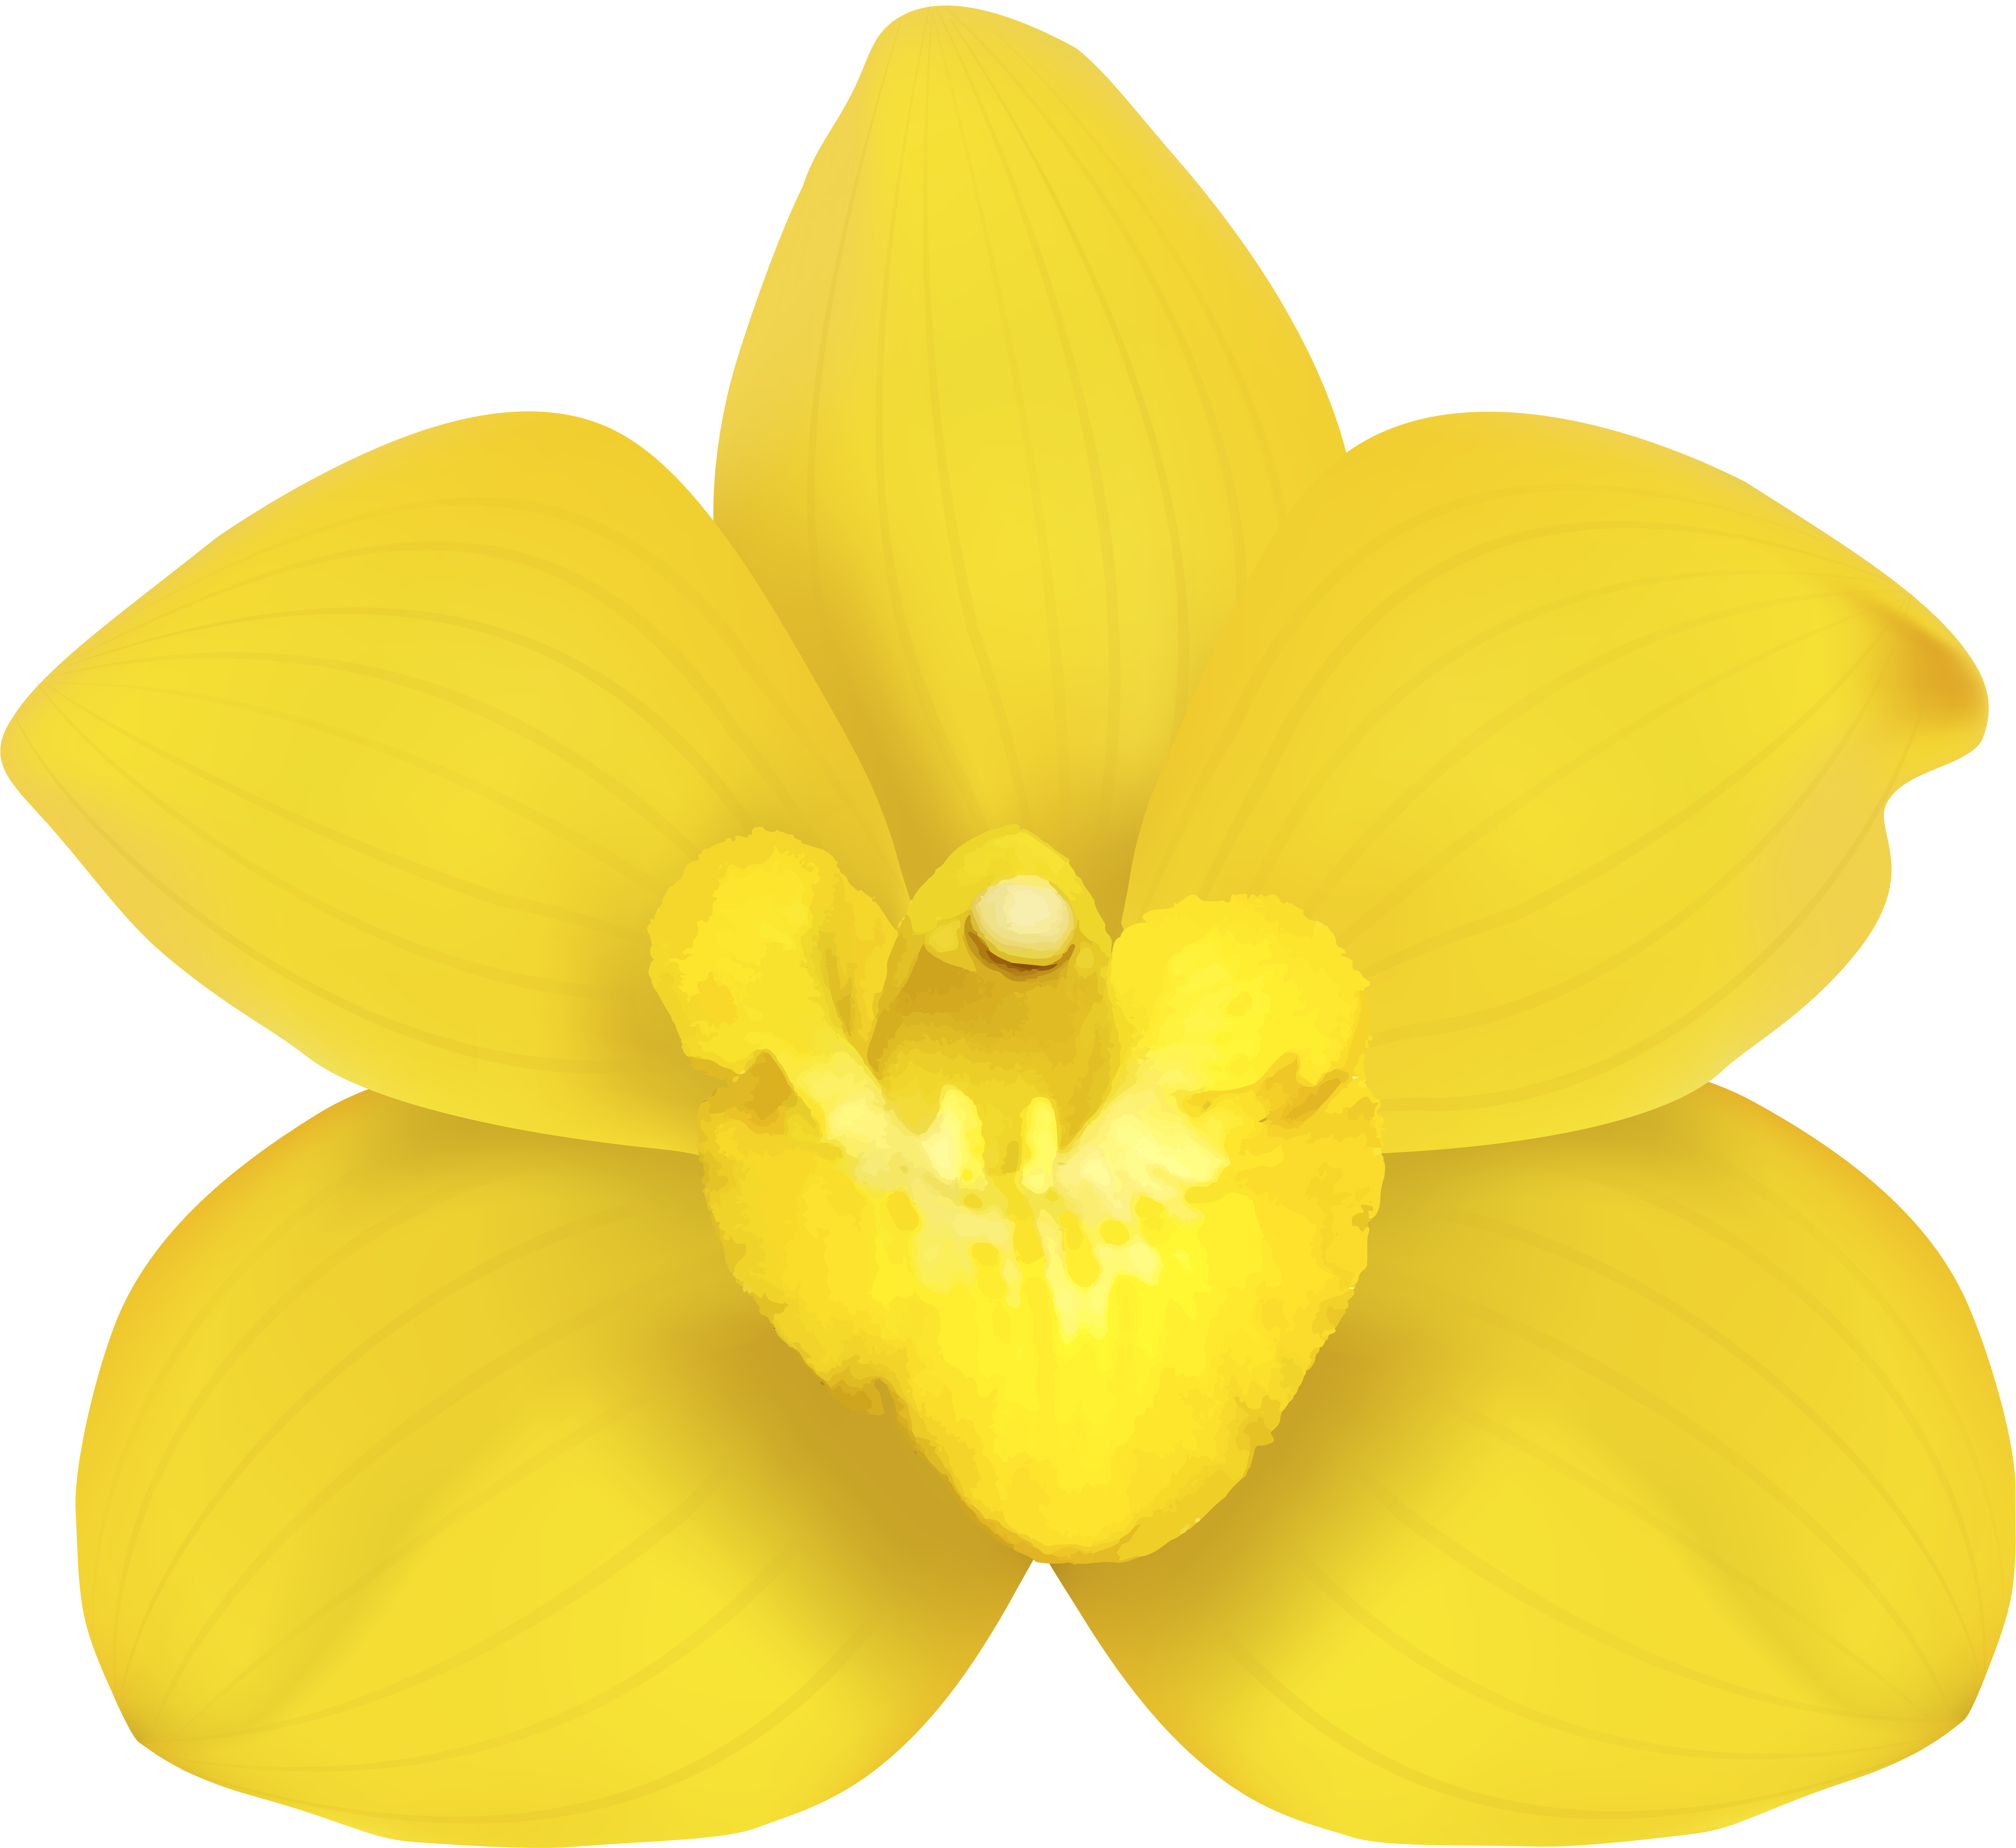 Yellow Narcissus Flower Illustration PNG image